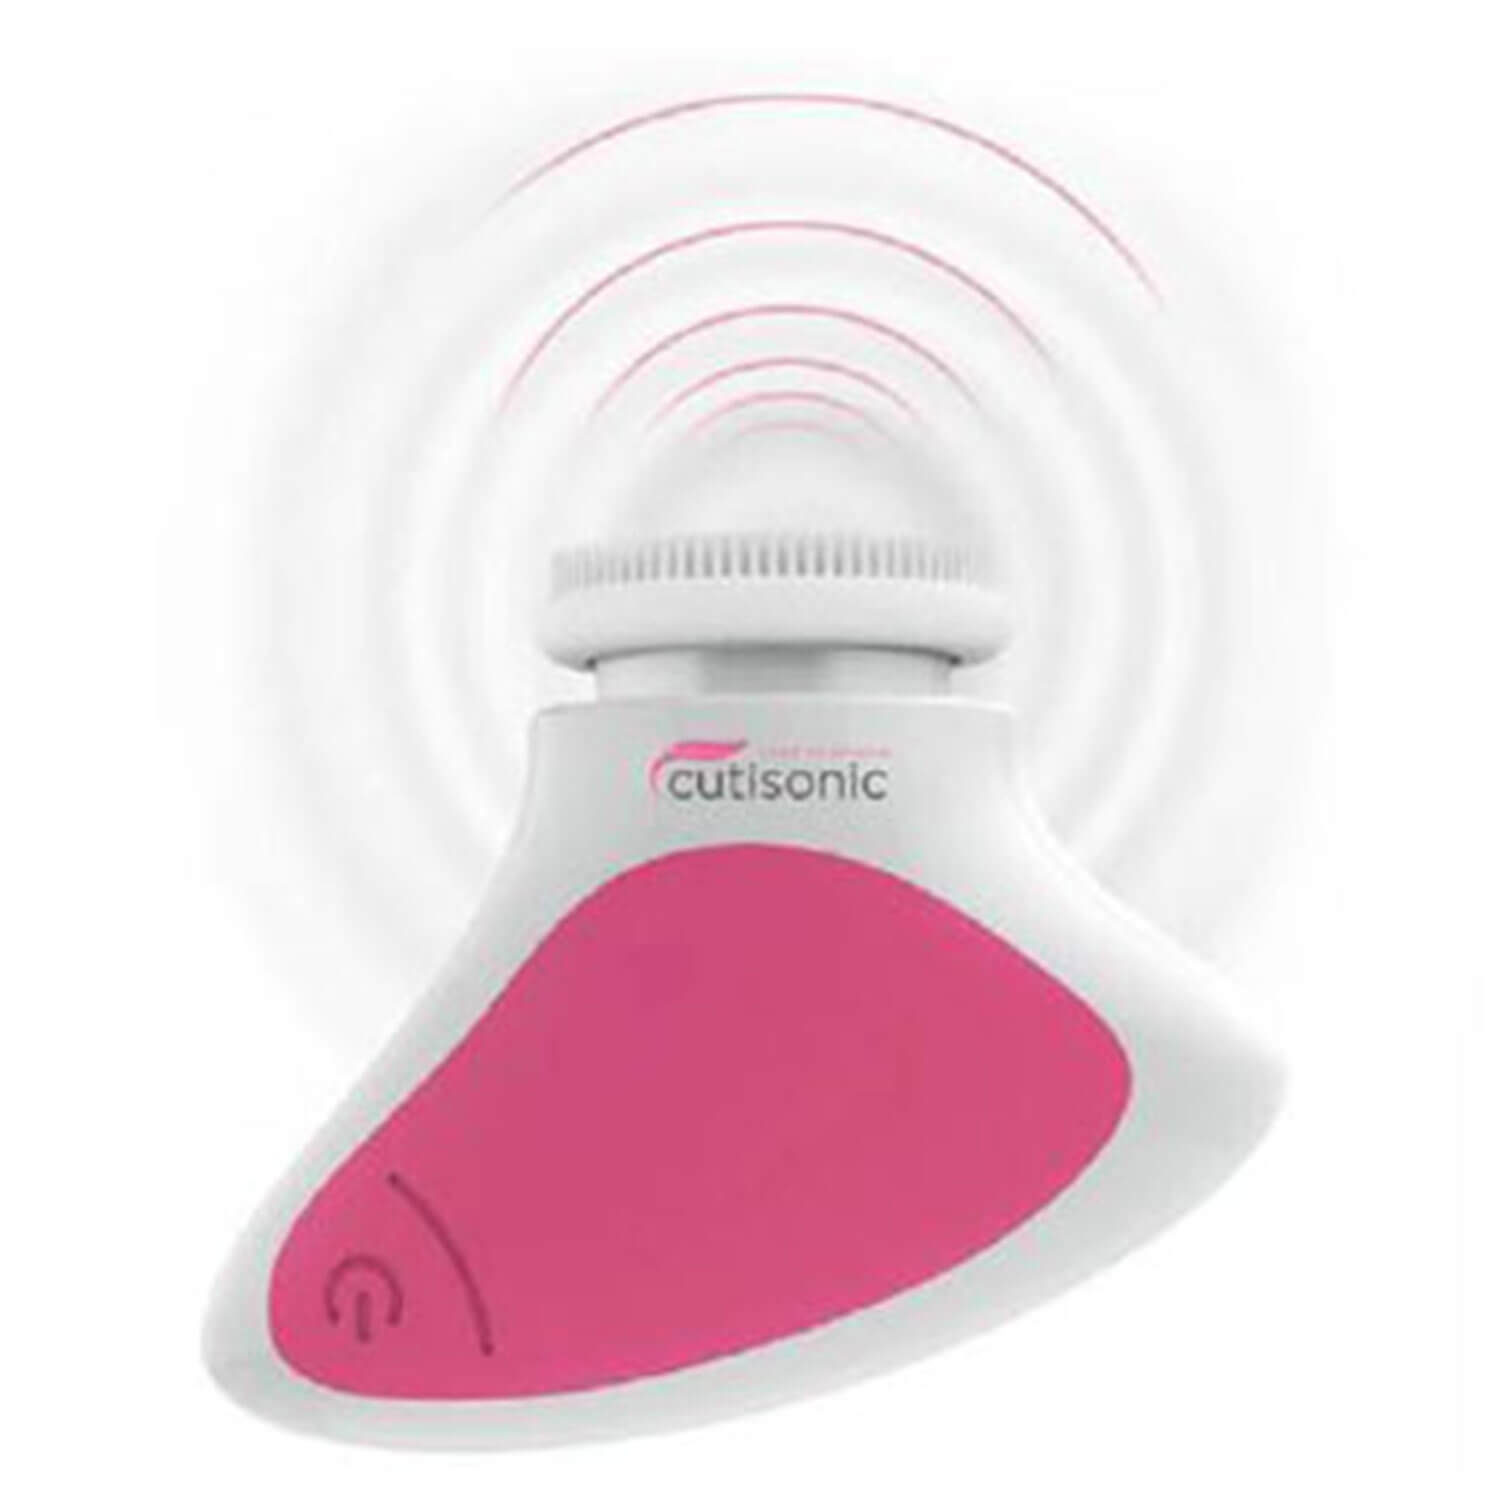 Product image from Cutisonic - Ultraschall-Gesichtpflegegerät Two